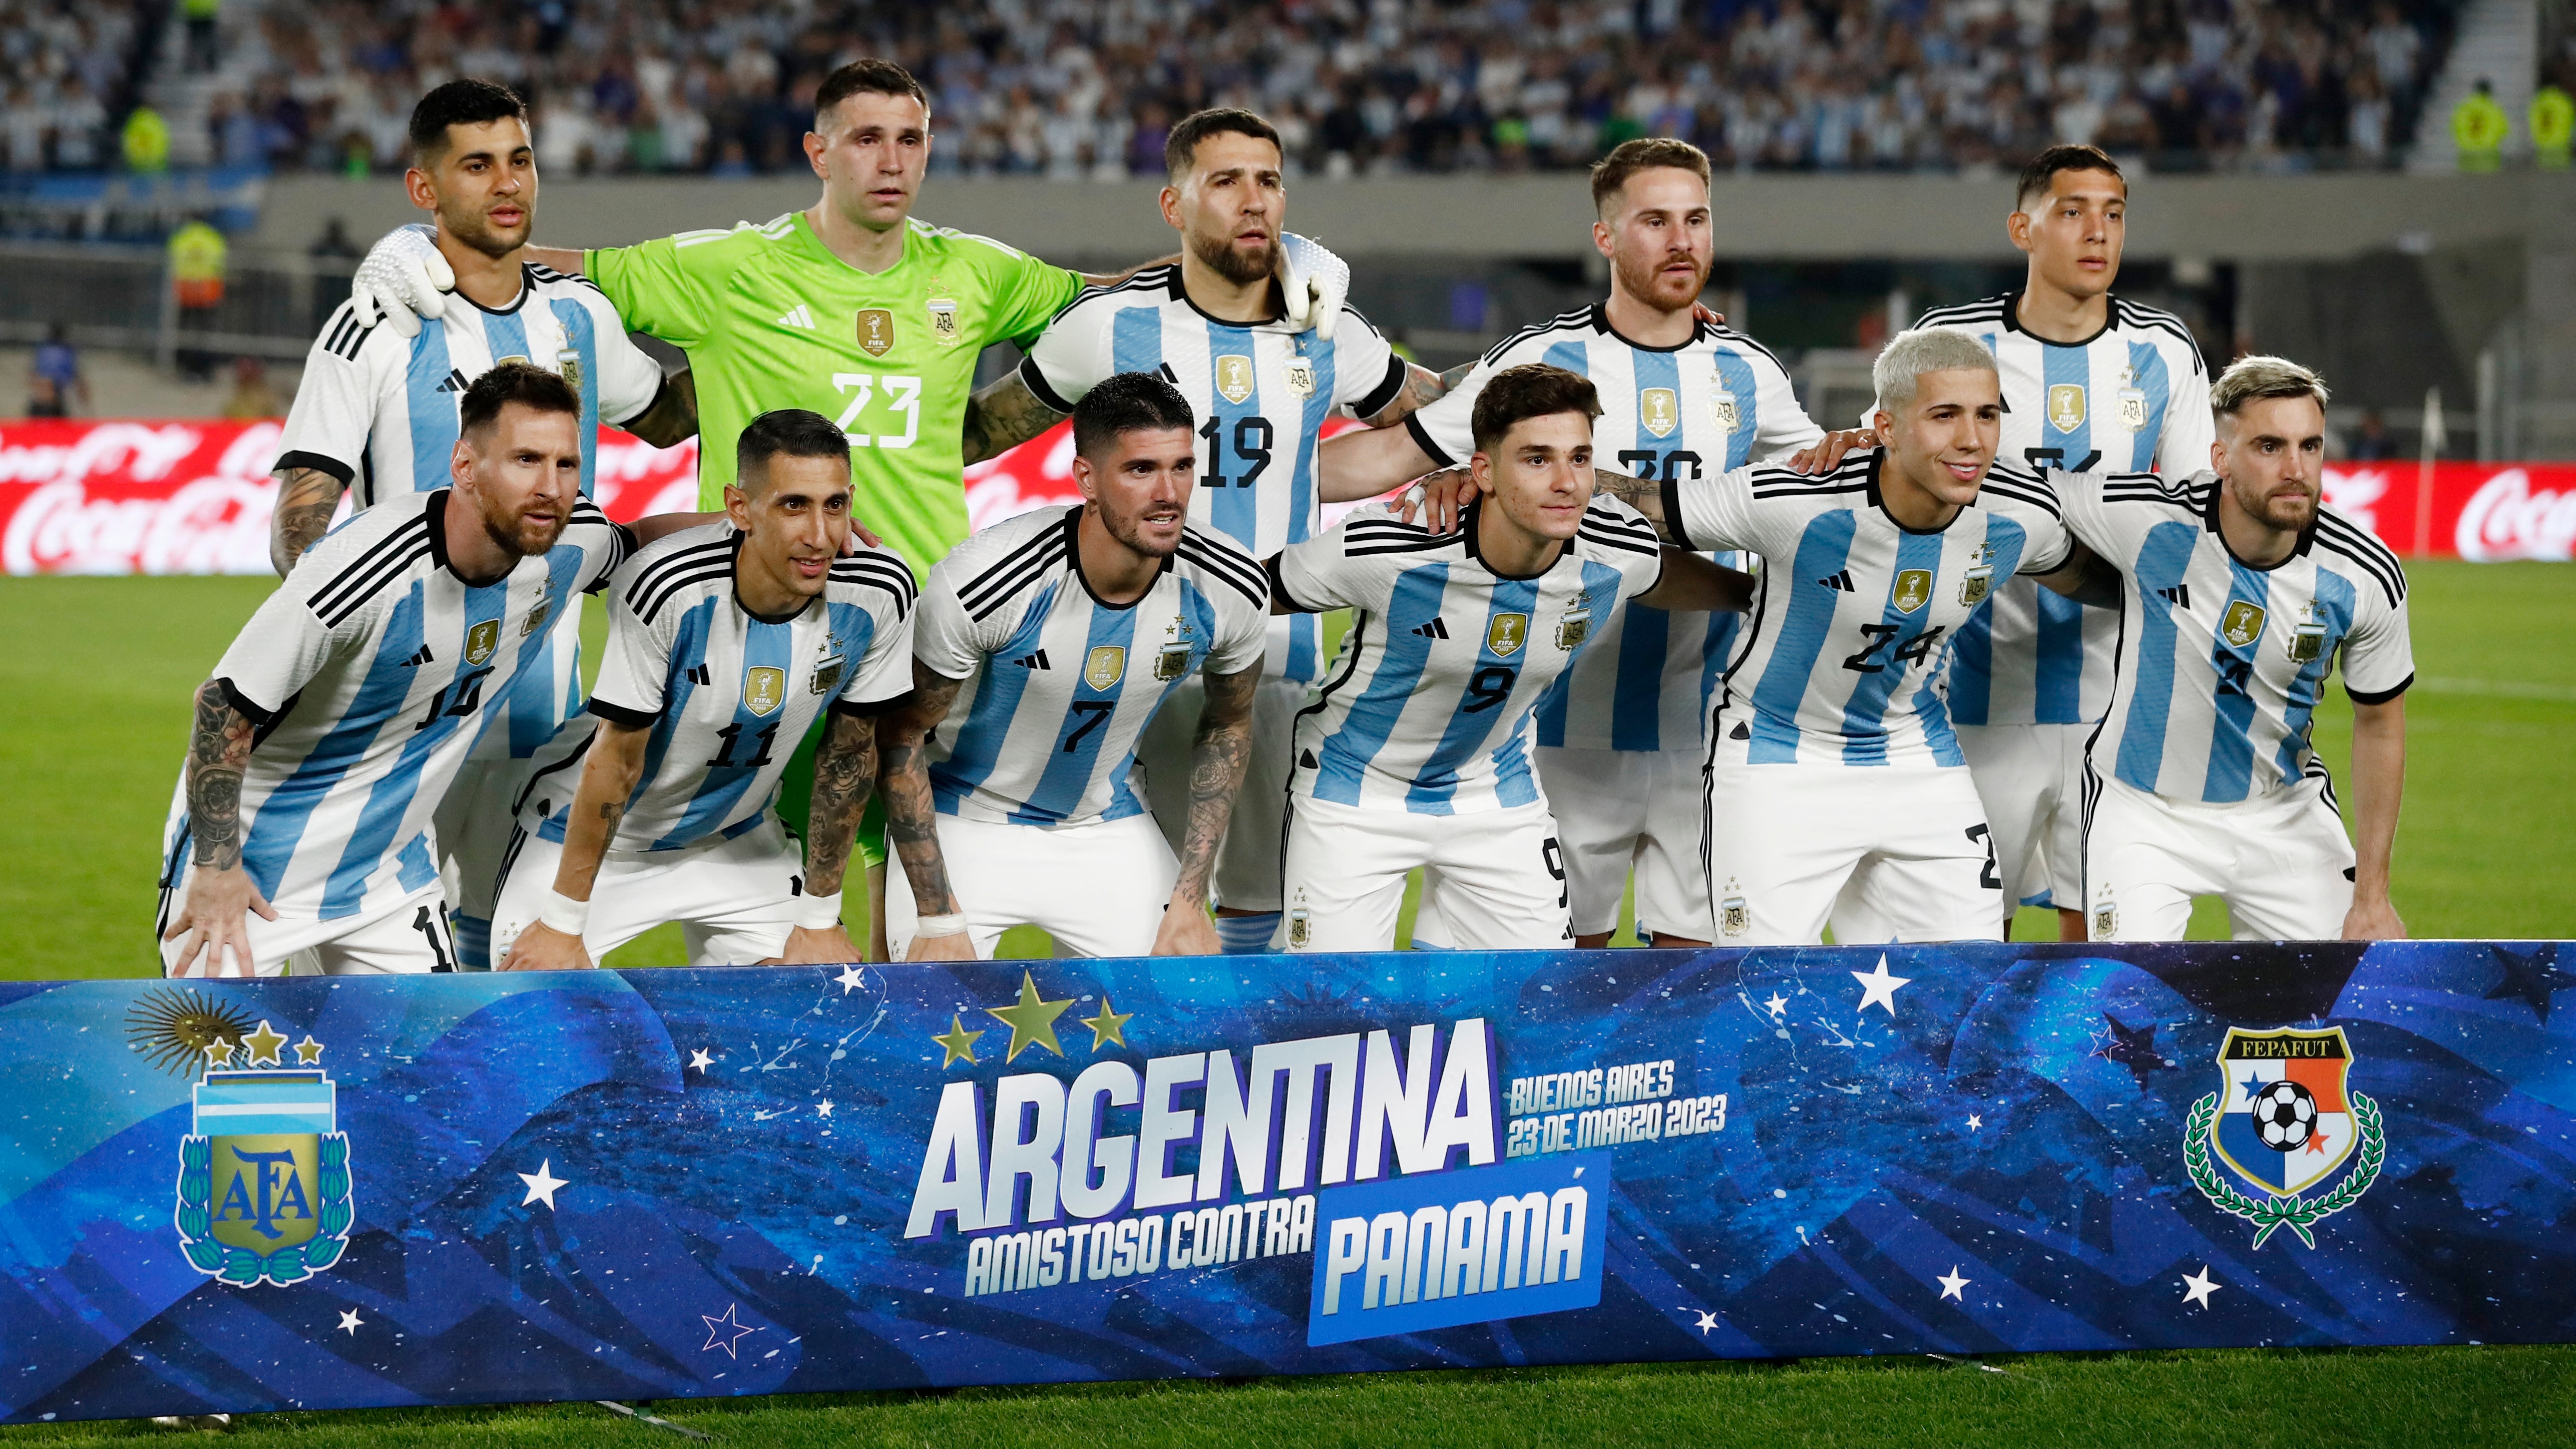 Argentina's starting eleven was made up of the same ones that faced France in the final in Qatar